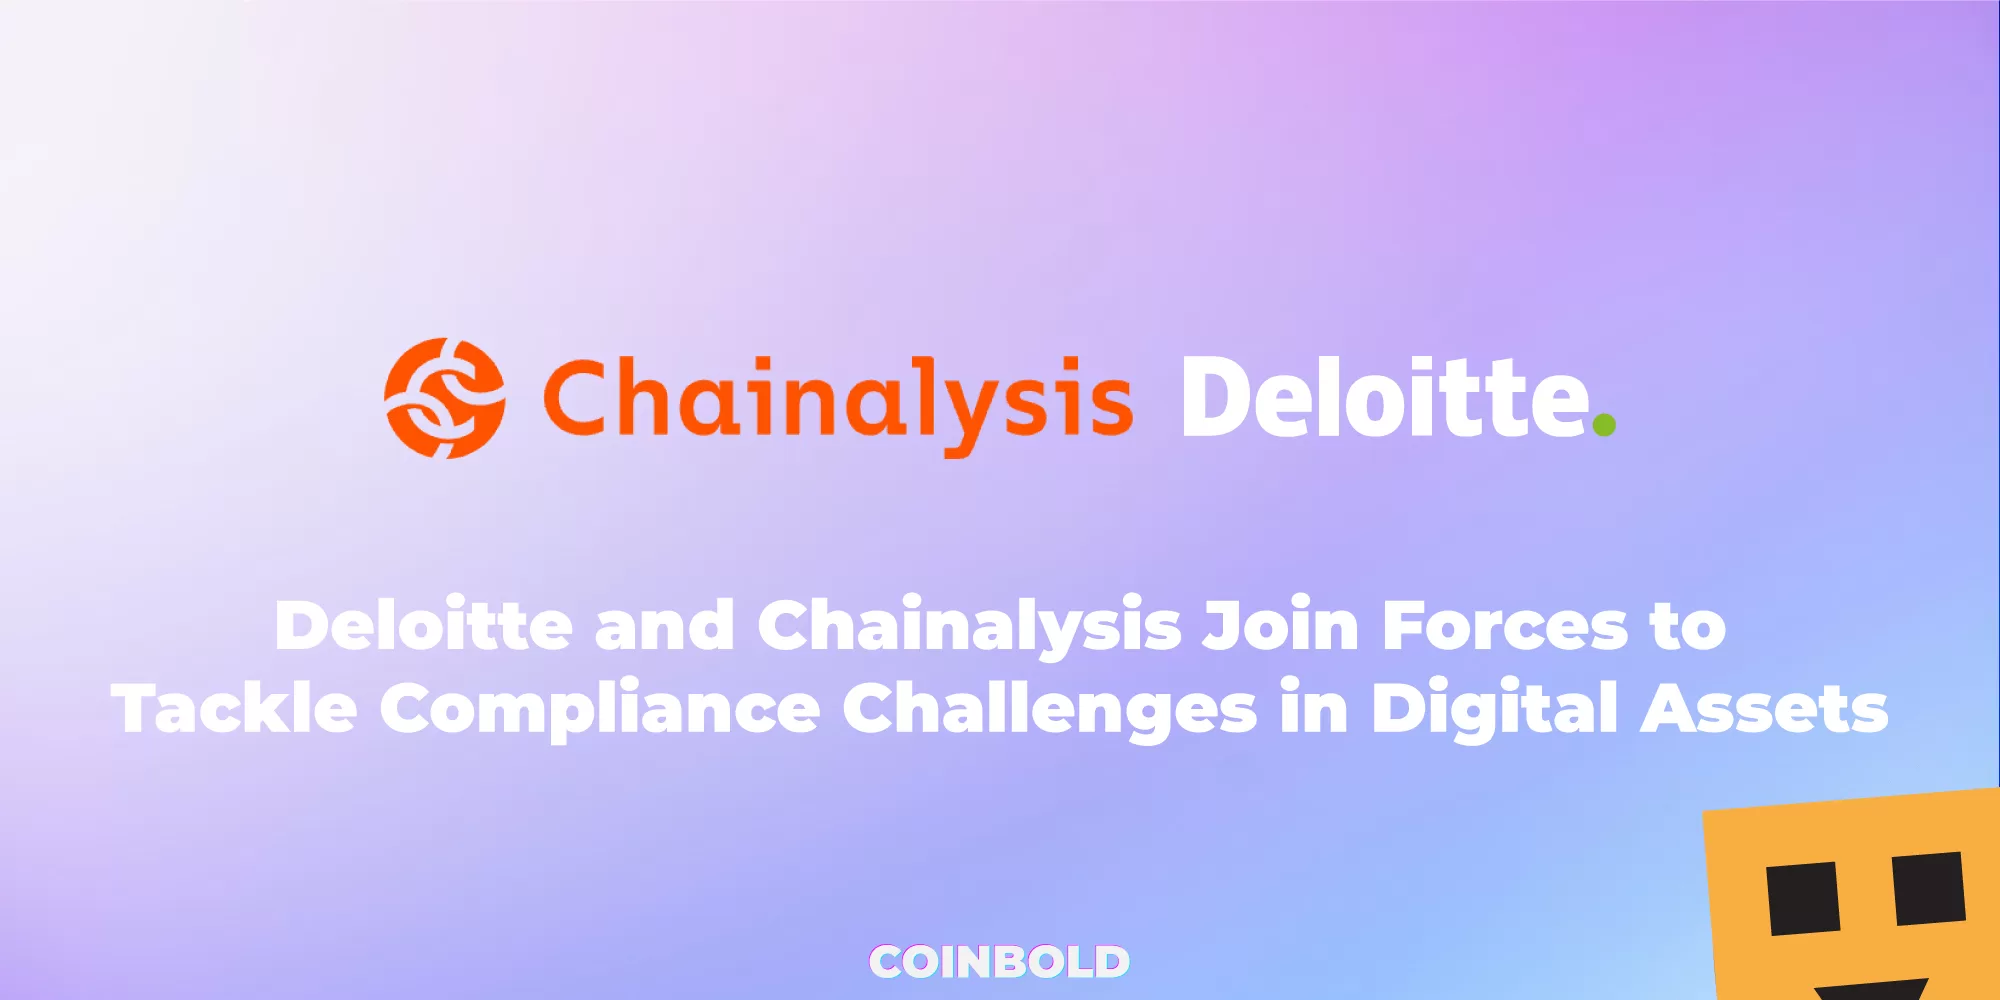 Deloitte and Chainalysis Alliance to Tackle Compliance Challenges in Digital Assets